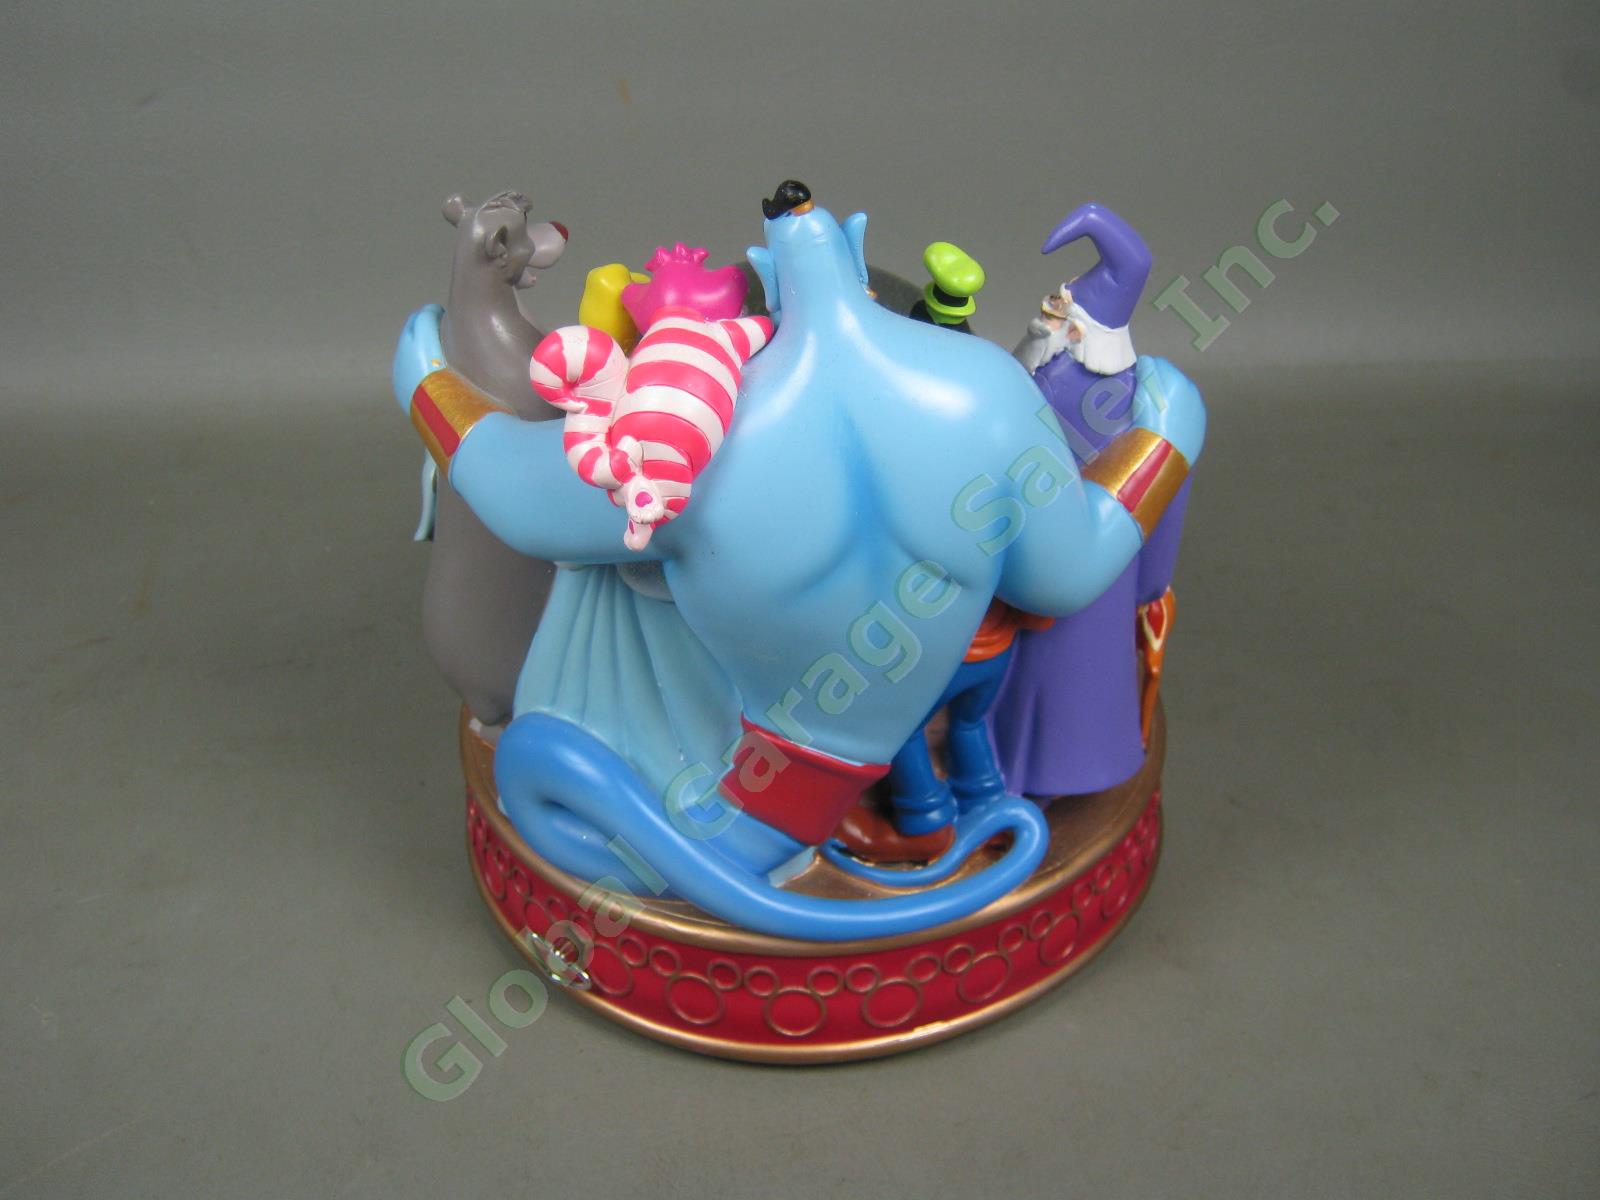 The Wonderful World Of Disney Store Musical Snow Globe When You Wish Upon A Star 3